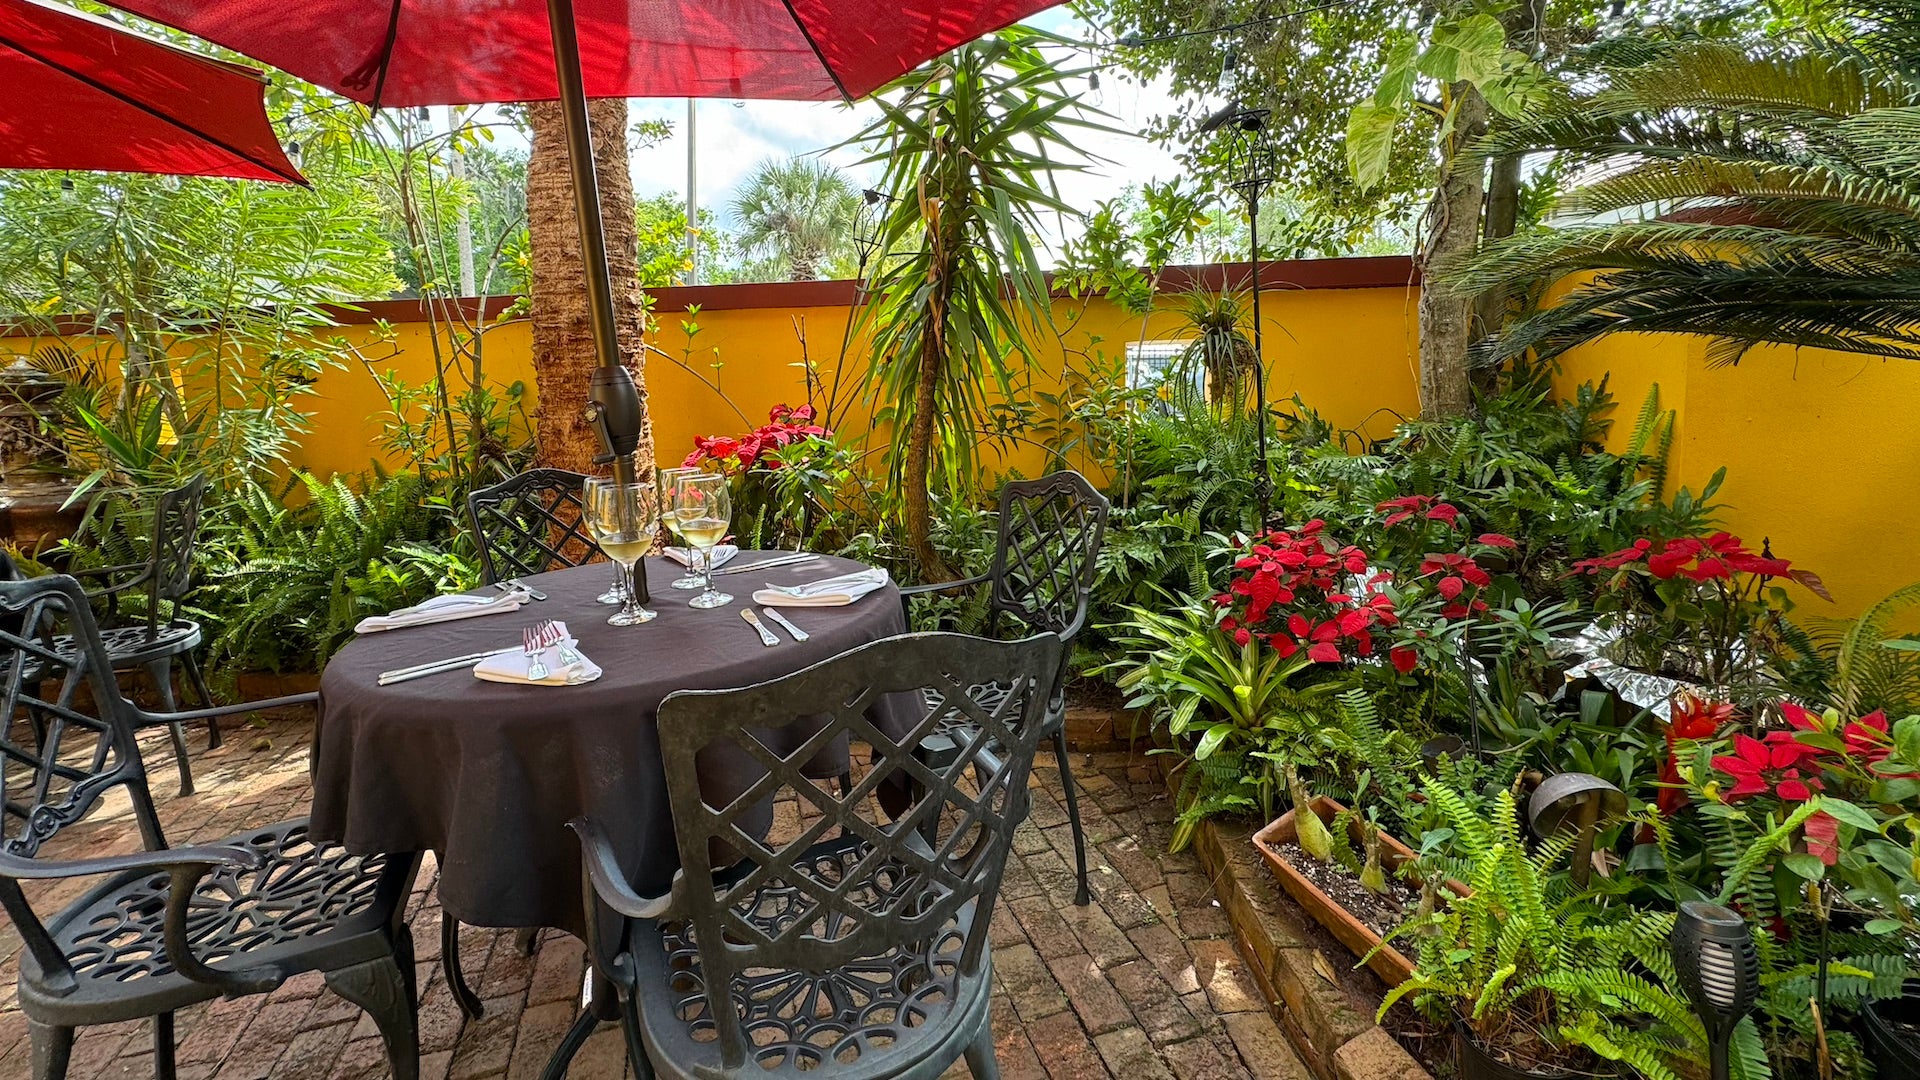 Outdoor space with yellow stone walls and a cobblestone floor with black patio furniture and red umbrellas surrounded by plants